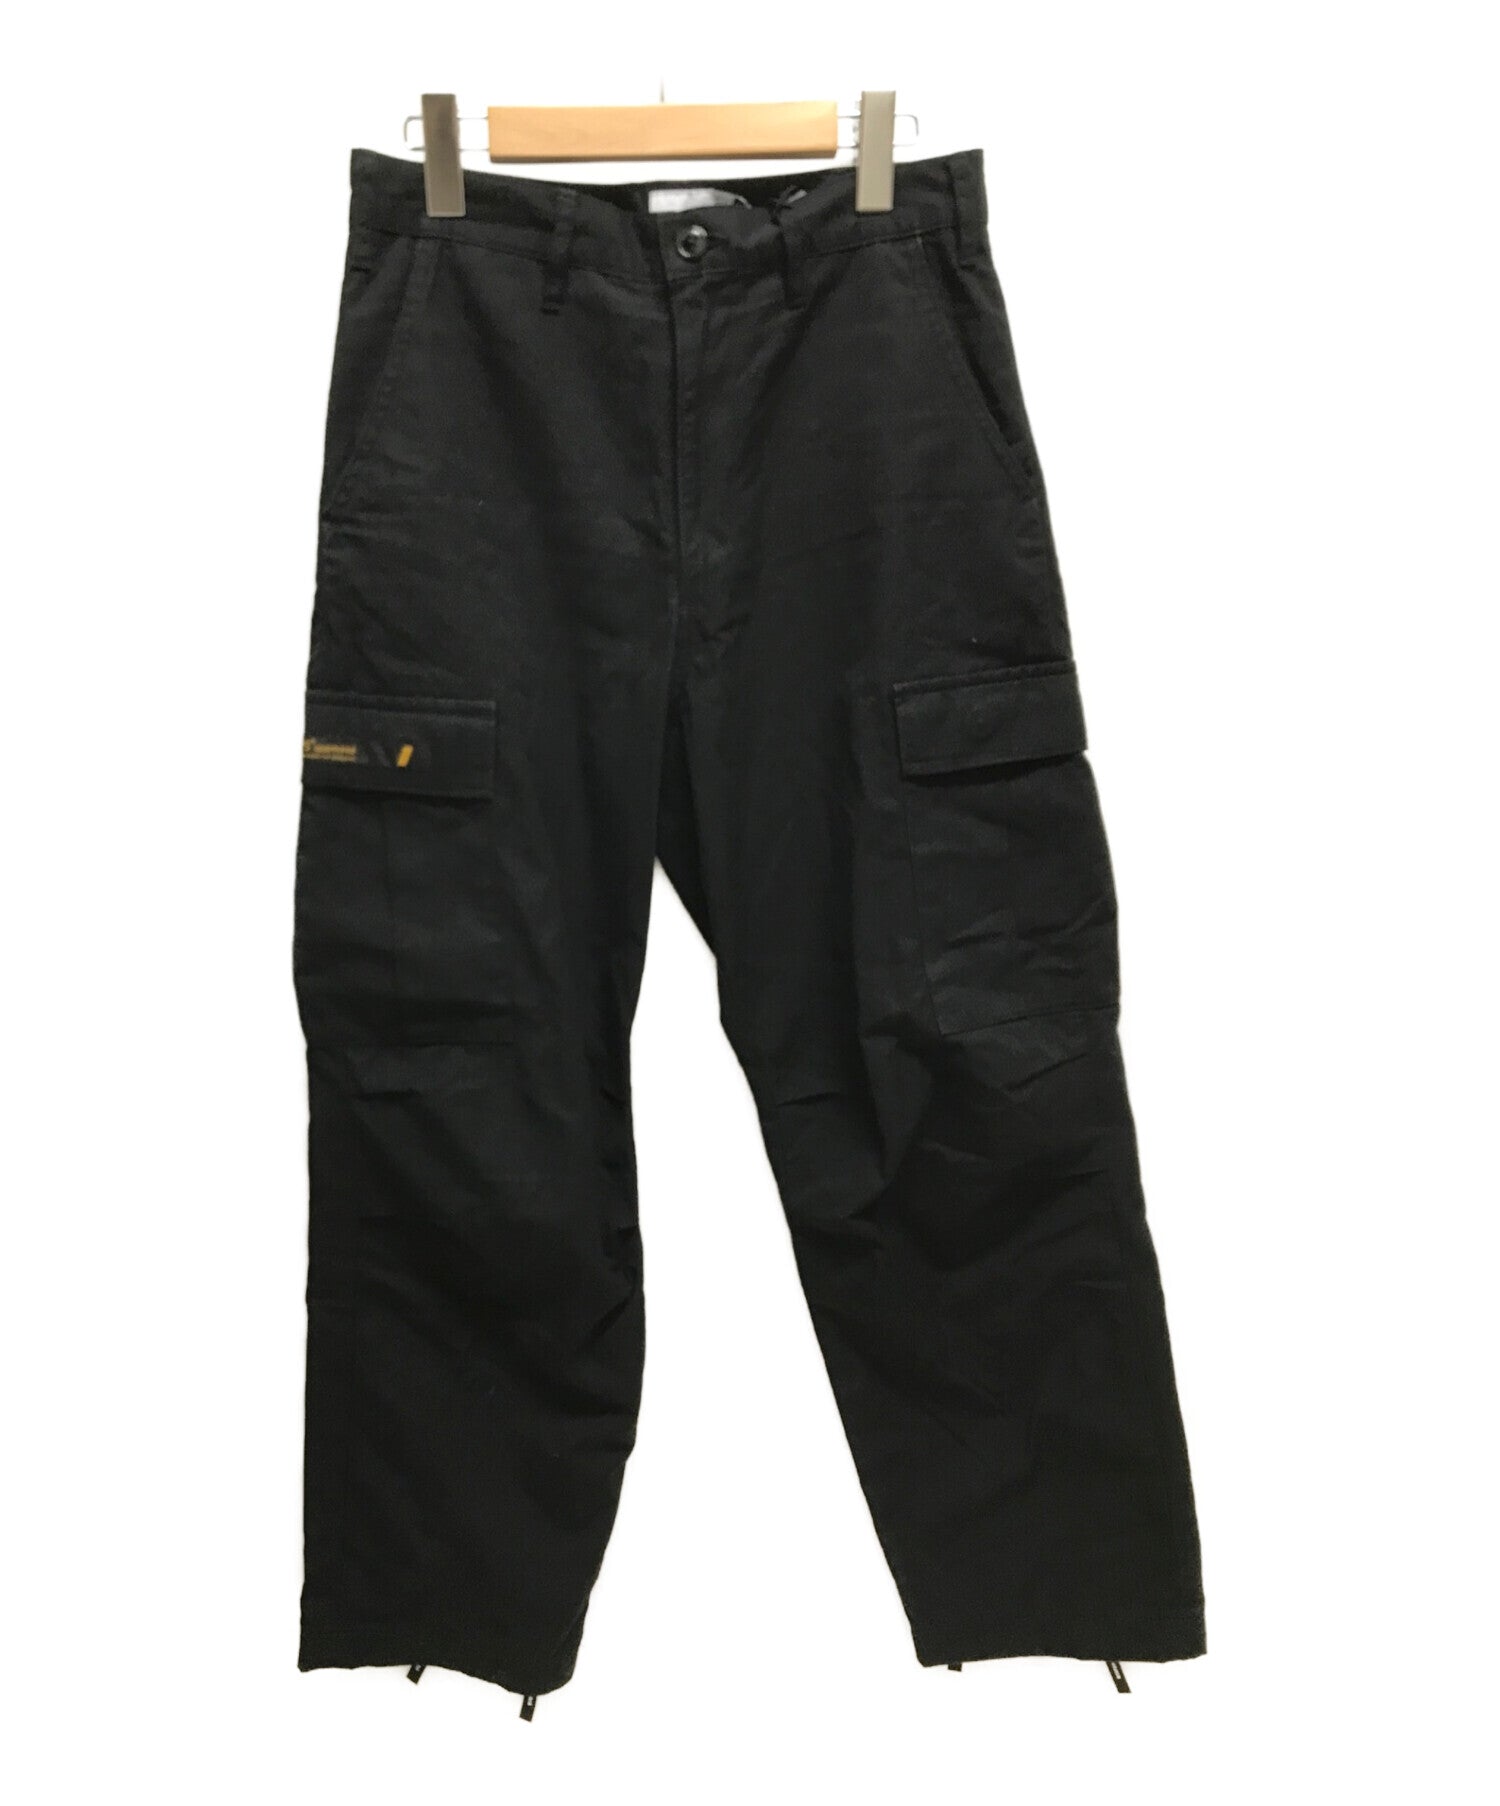 Pre-owned] WTAPS JUNGLE STOCK TROUSERS COTTON.RIPSTOP cargo pants 